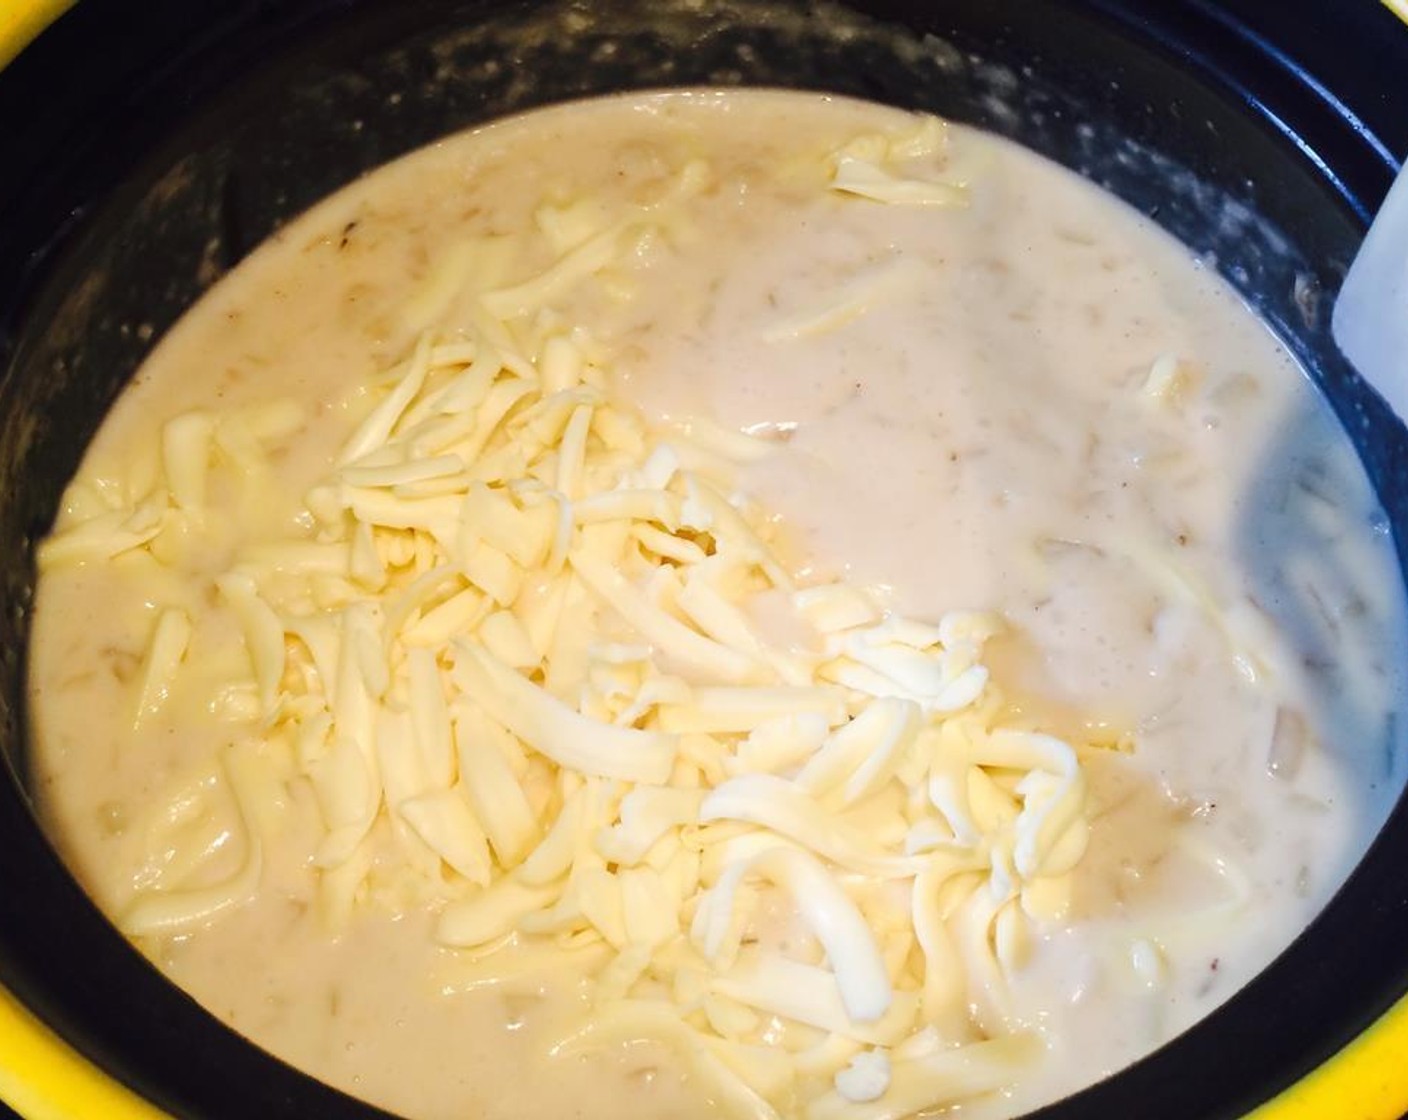 step 11 Bring to a boil; cook and stir for 1-2 minutes or until thickened. Add more water if you prefer a thinner consistency. Lower heat, stir in clam meat and Shredded Cheese (1/4 cup).